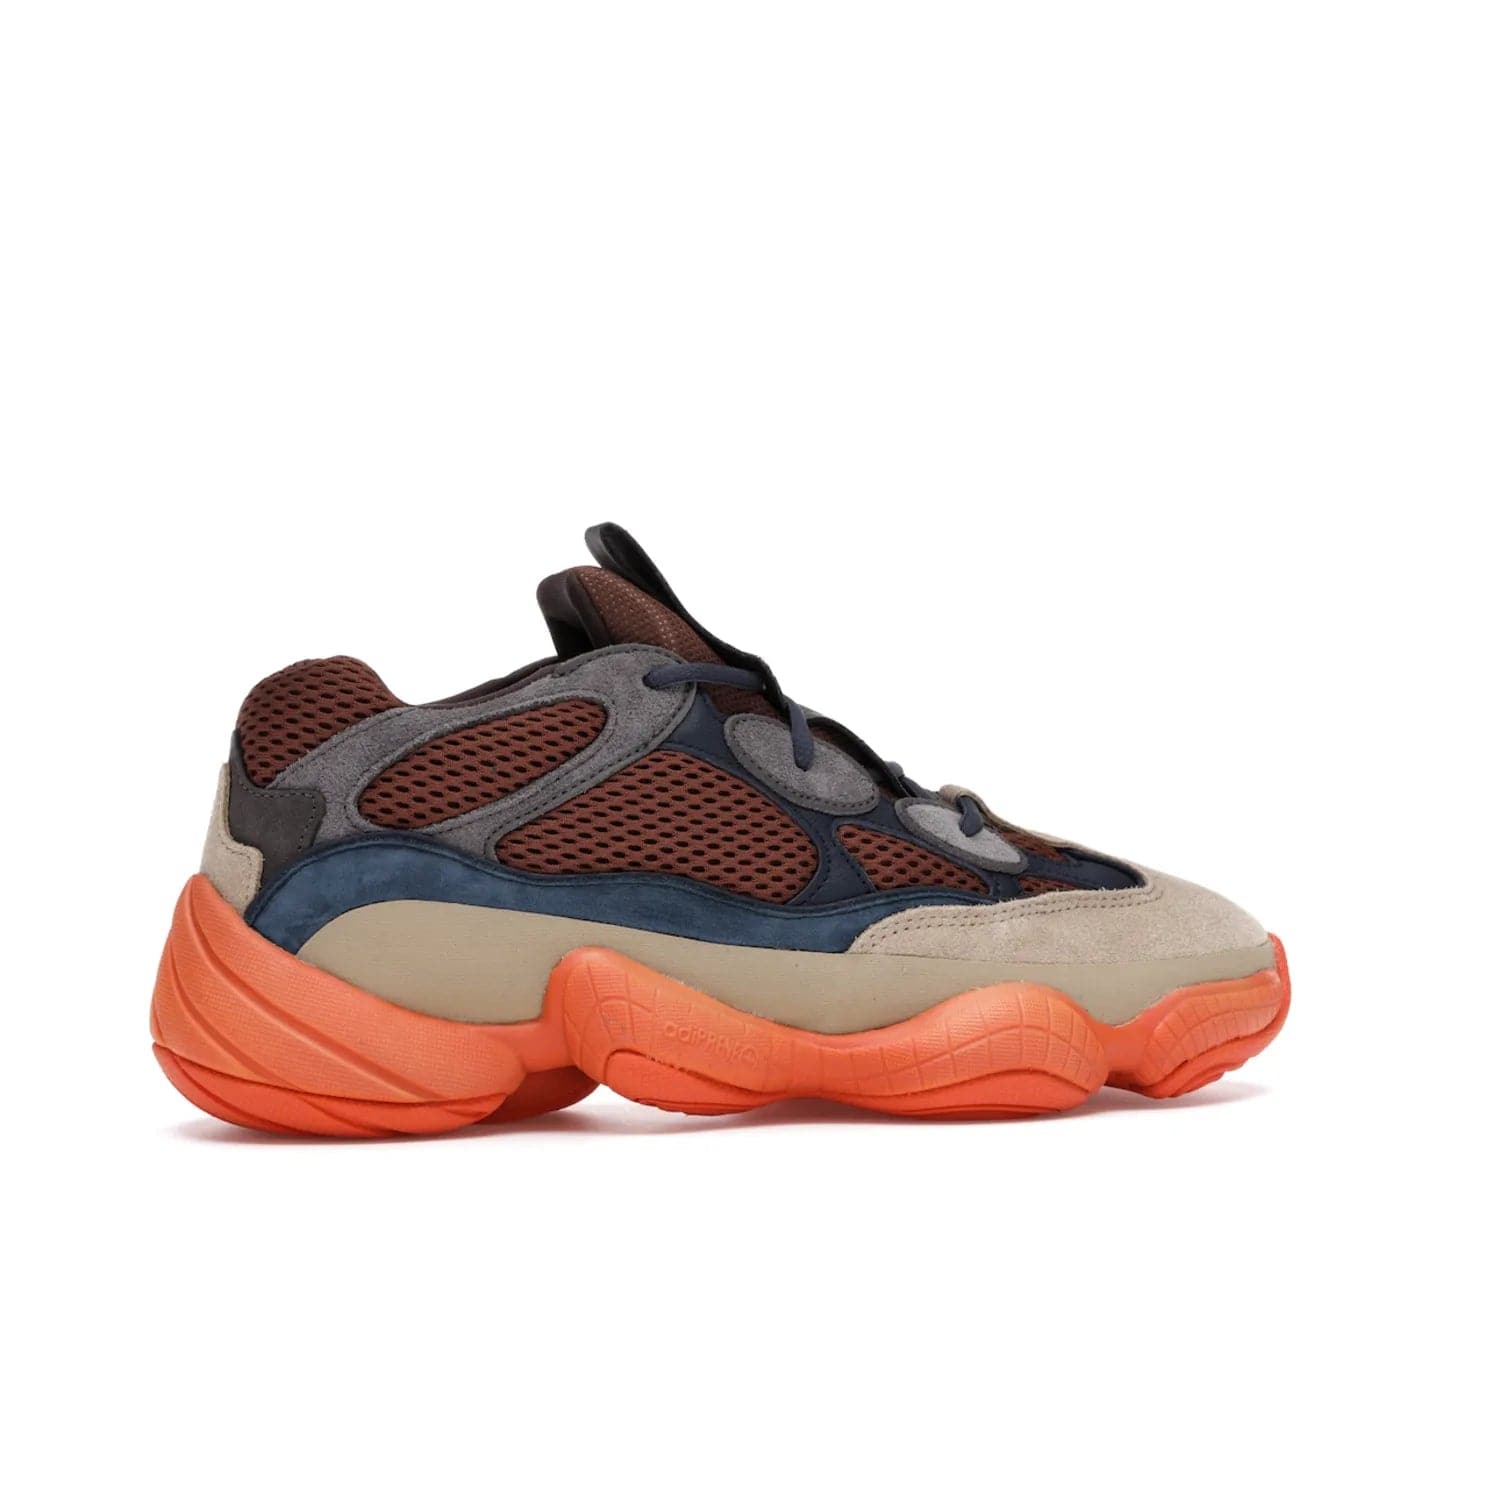 adidas Yeezy 500 Enflame - Image 35 - Only at www.BallersClubKickz.com - Step into style with the adidas Yeezy 500 Enflame. Mix of mesh, leather, and suede layered together to create tonal-brown, dark blue, & orange. Orange AdiPRENE sole provides superior cushioning & comfort. Get yours and experience maximum style.